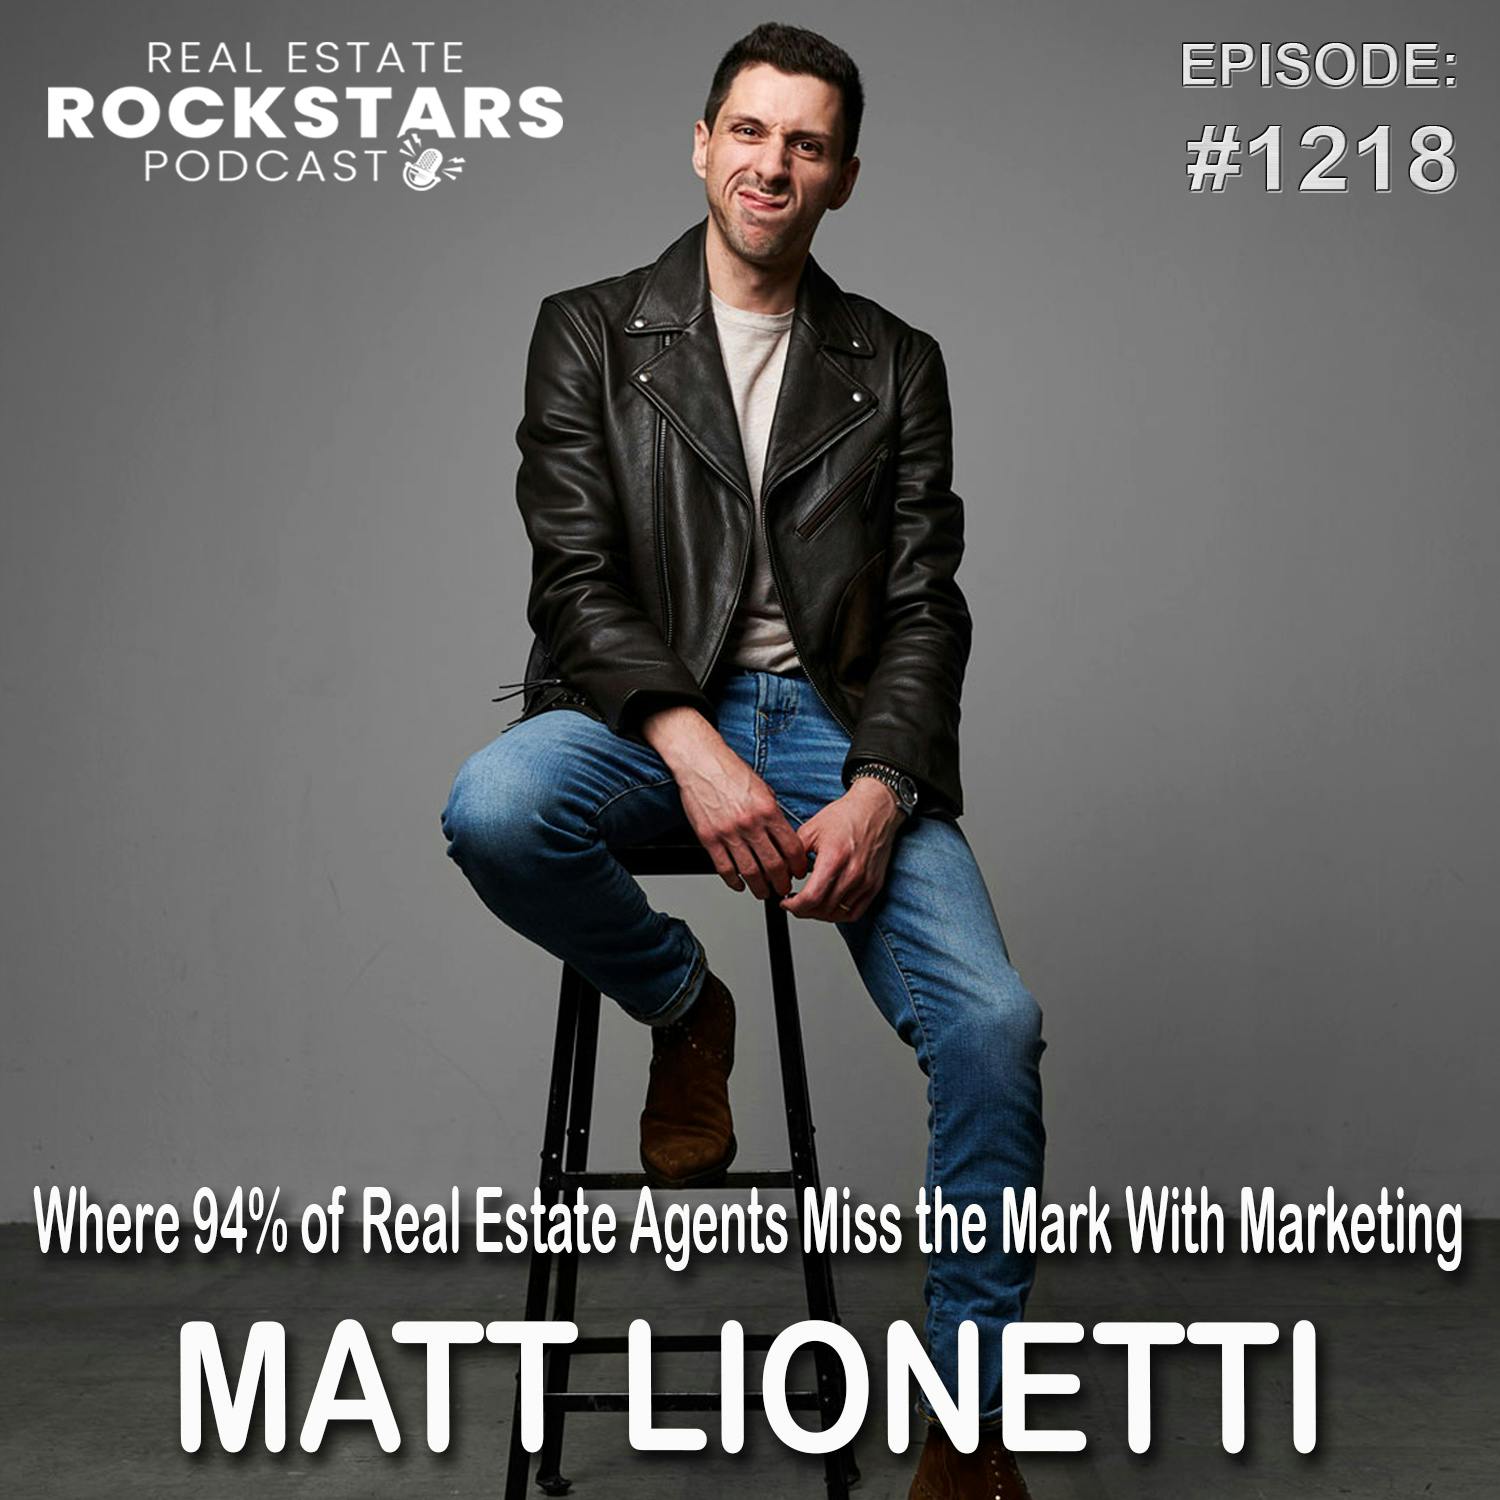 1218: Where 94% of Real Estate Agents Miss the Mark With Marketing - Matt Lionetti